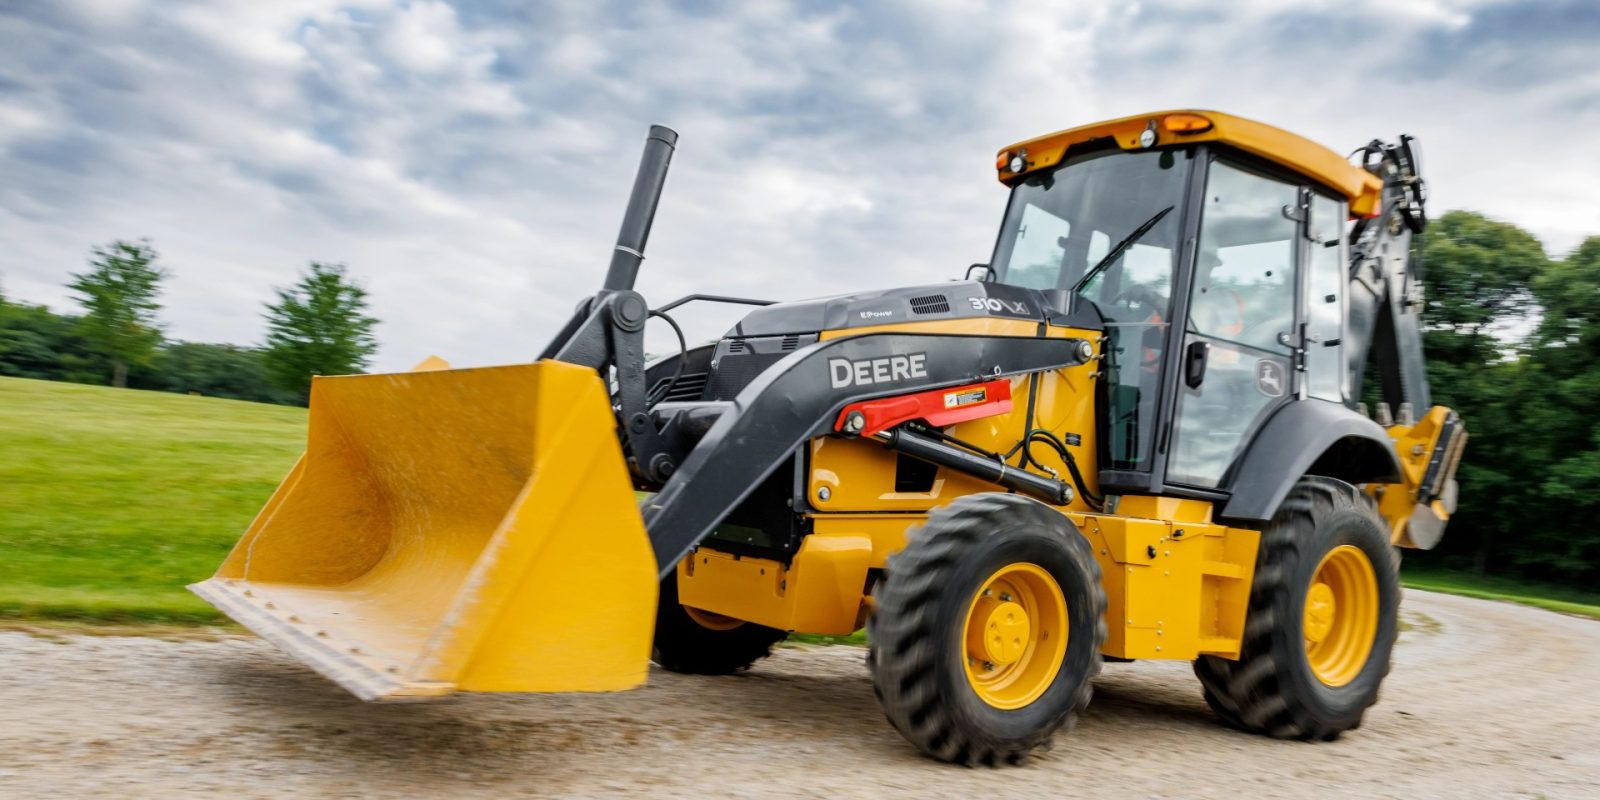 Here's what I found out in Texas about John Deere's electric backhoe